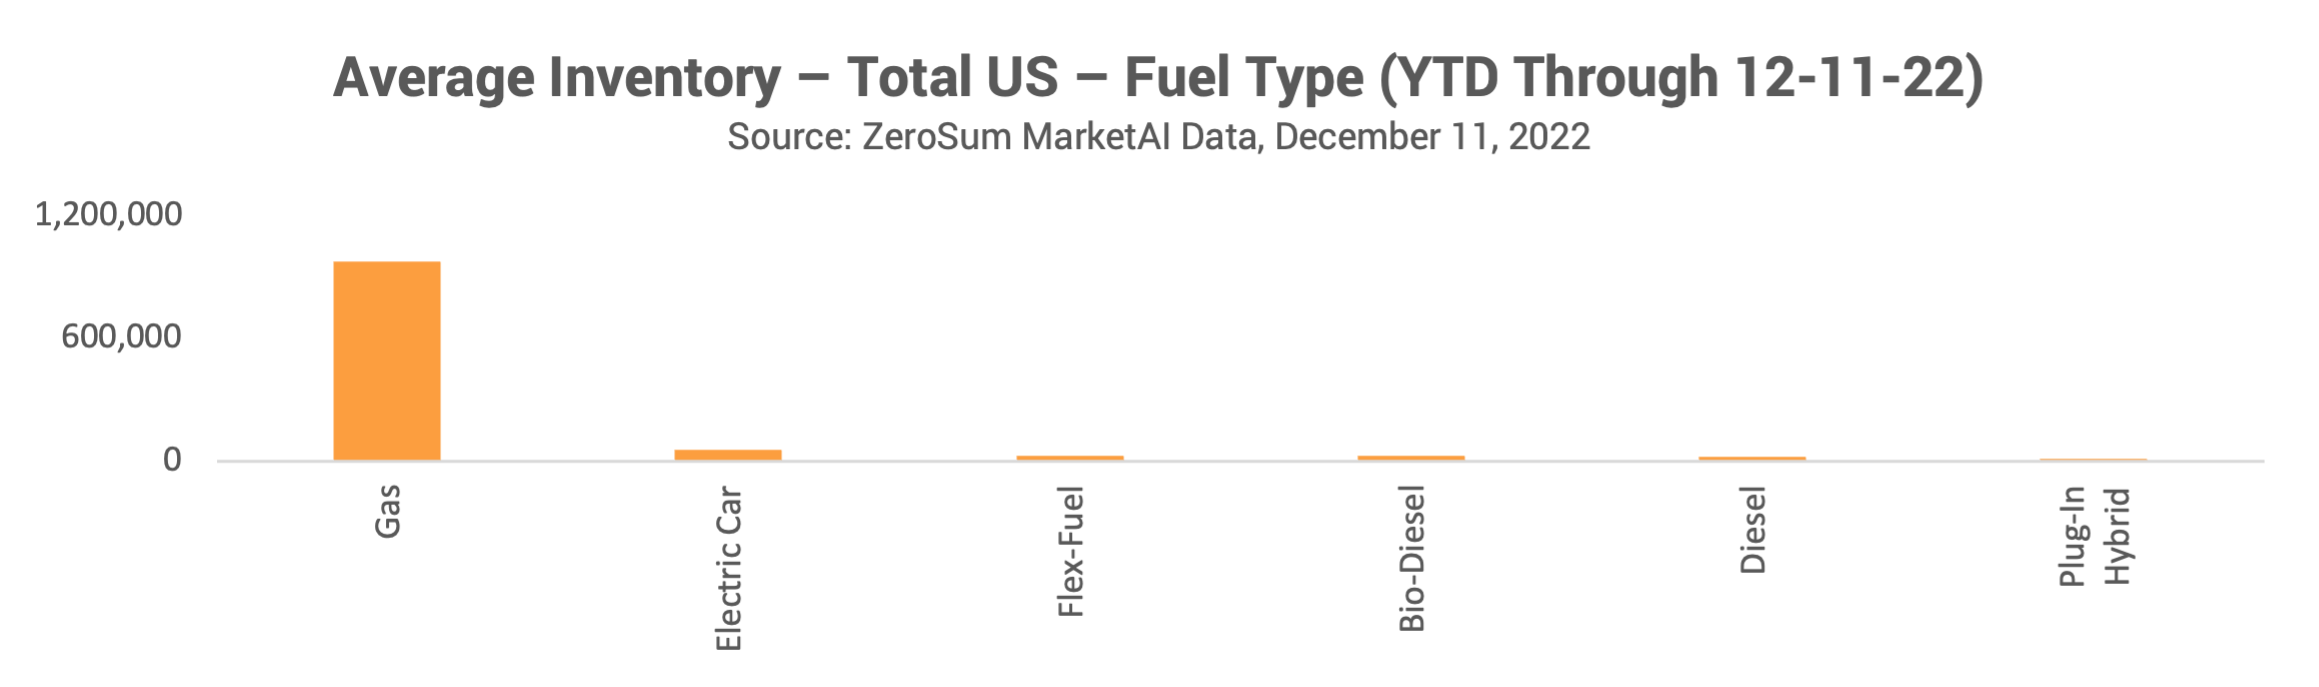 Average Inventory Total US Fuel Type